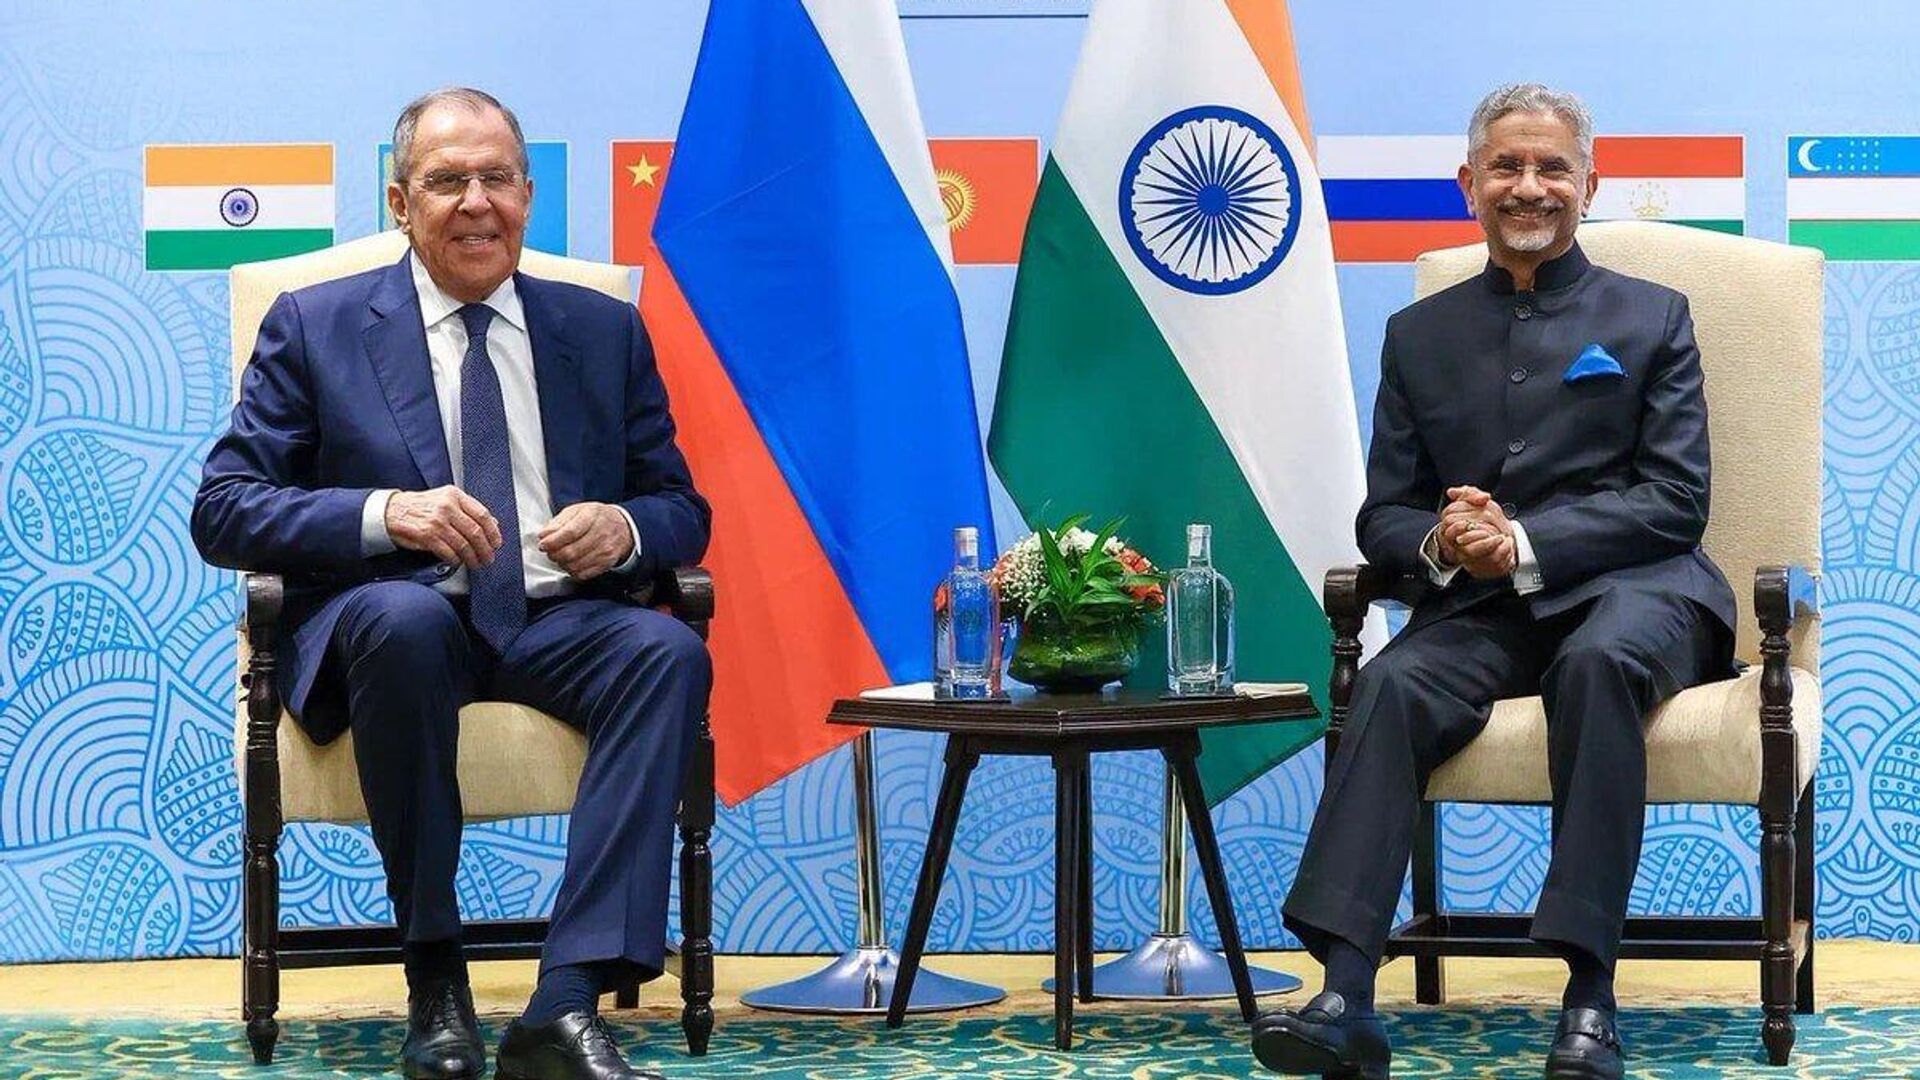 India and Russian foreign ministers hold talks in Goa on the sidelines of the SCO meet - Sputnik India, 1920, 20.11.2023